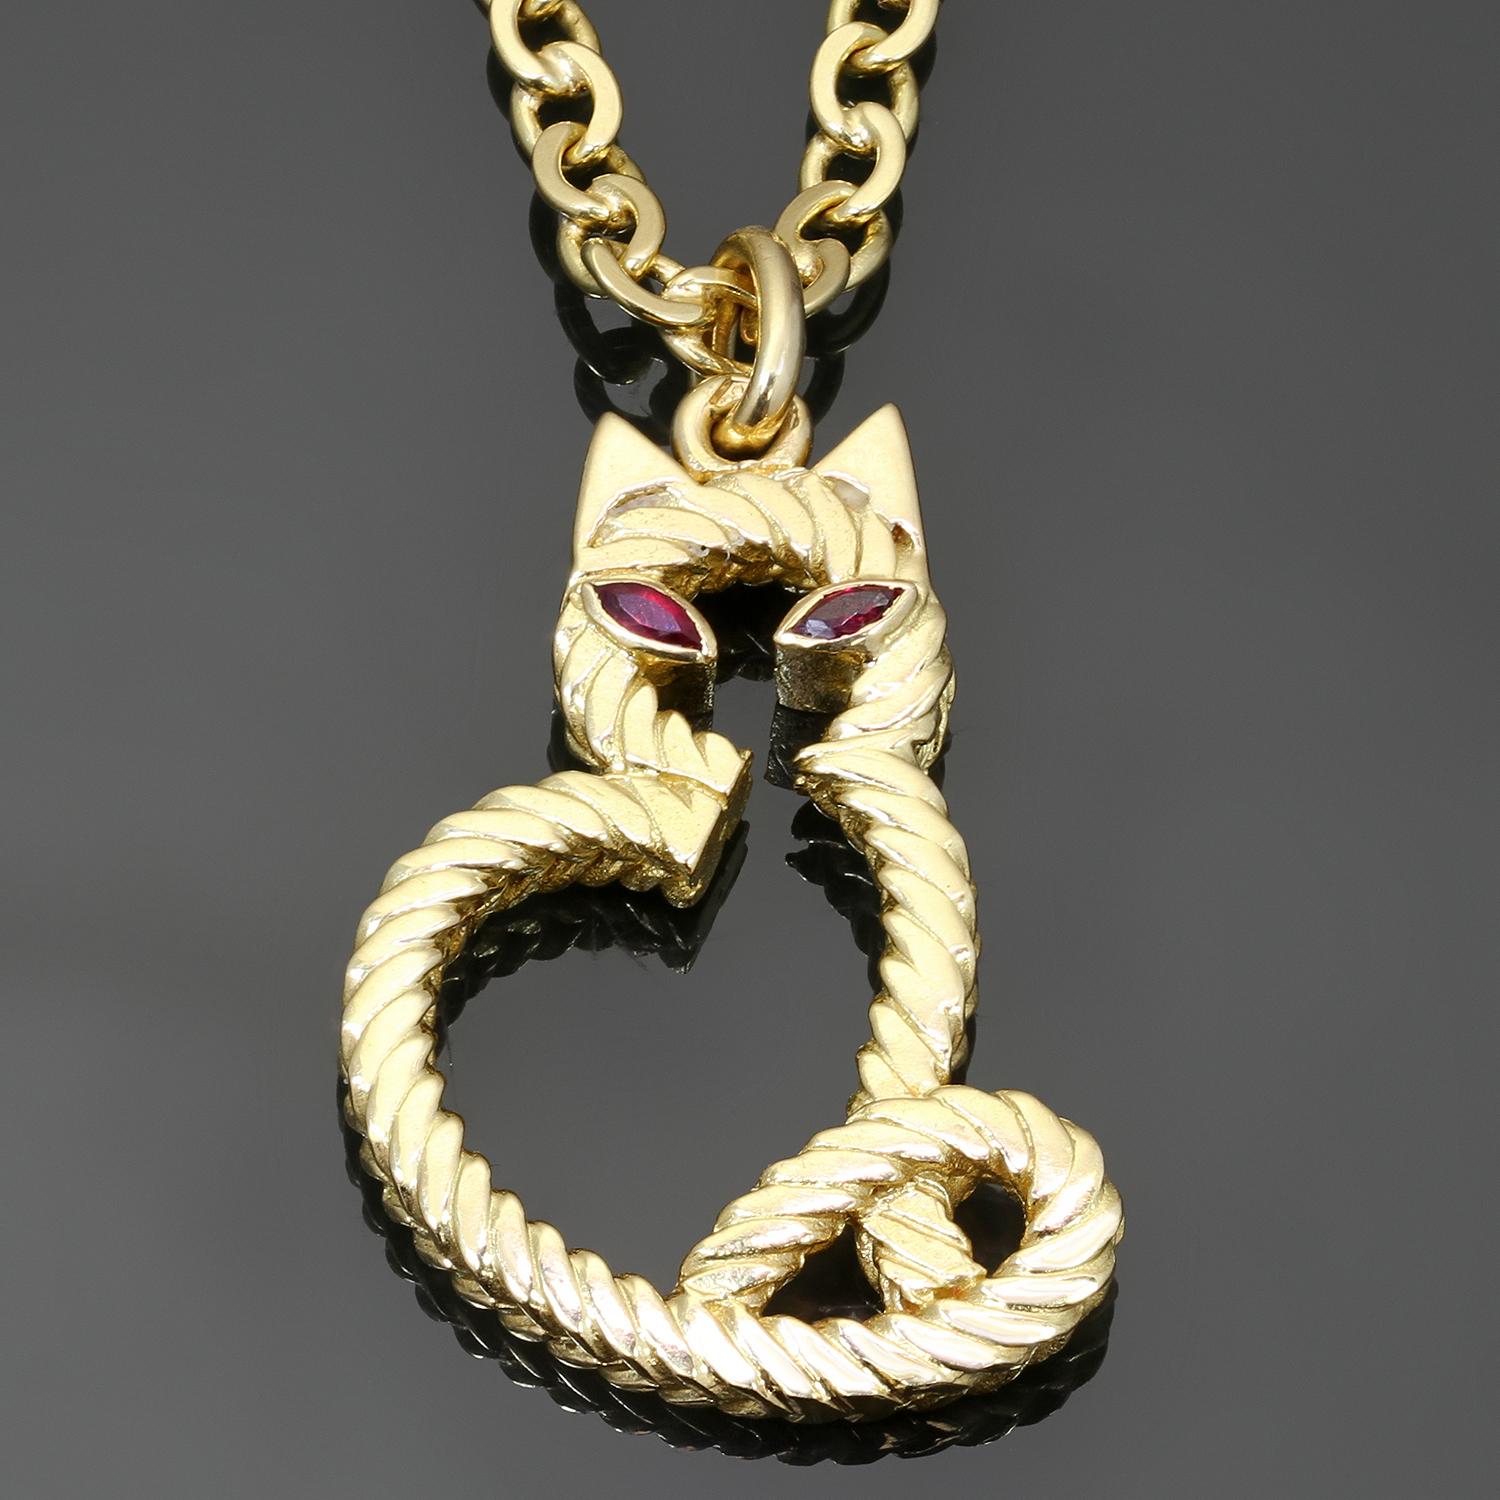 This rare and collectible antique Van Cleef & Arpels pendant was designed by Georges L'Enfant and features the shape of a cat crafted in textured 18k yellow gold and accented with marquise-cut red ruby eyes. Made in France circa 1960s. Measurements: